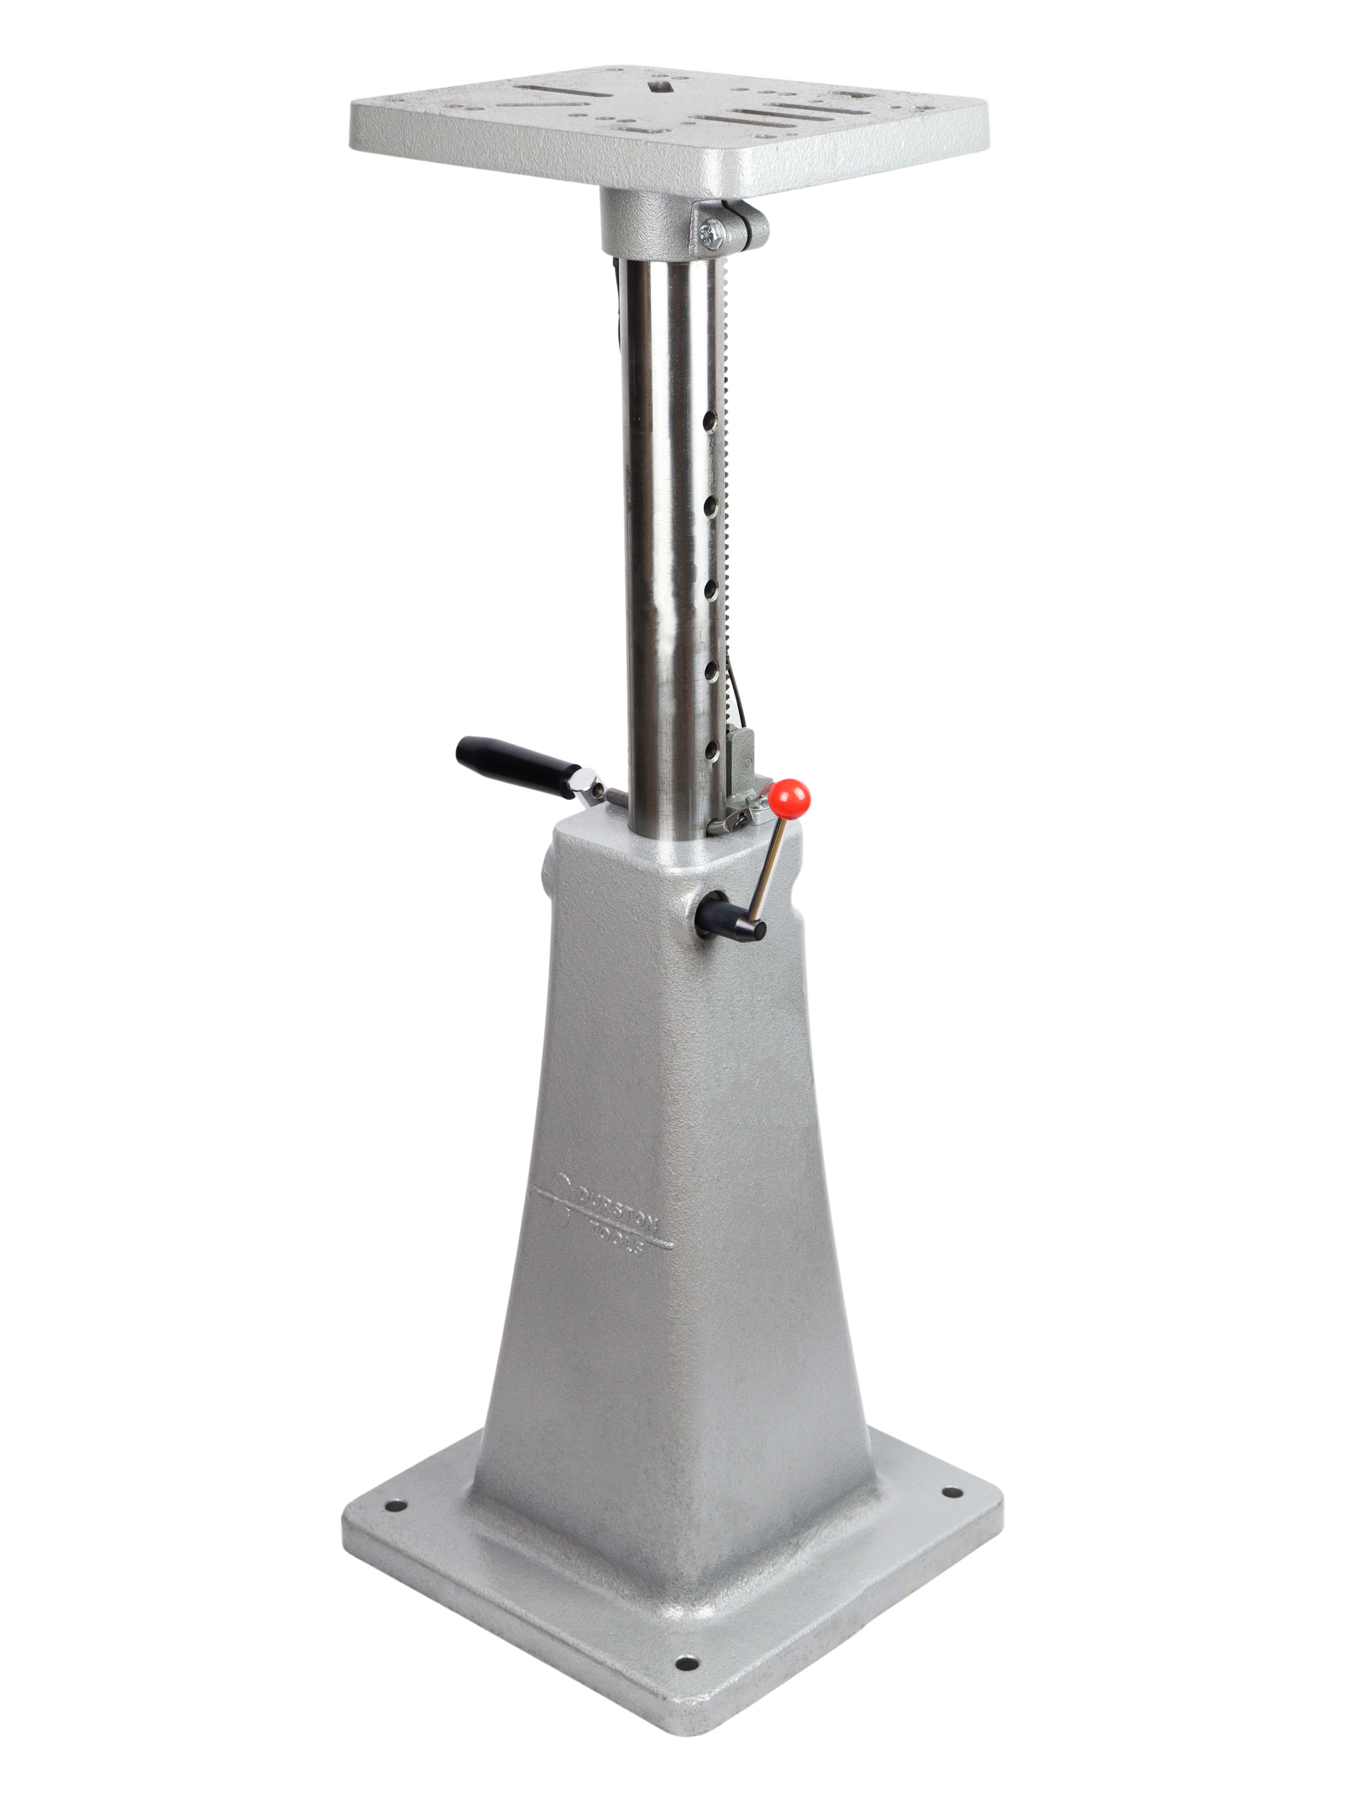 Adjustable stand for Durston rolling mills